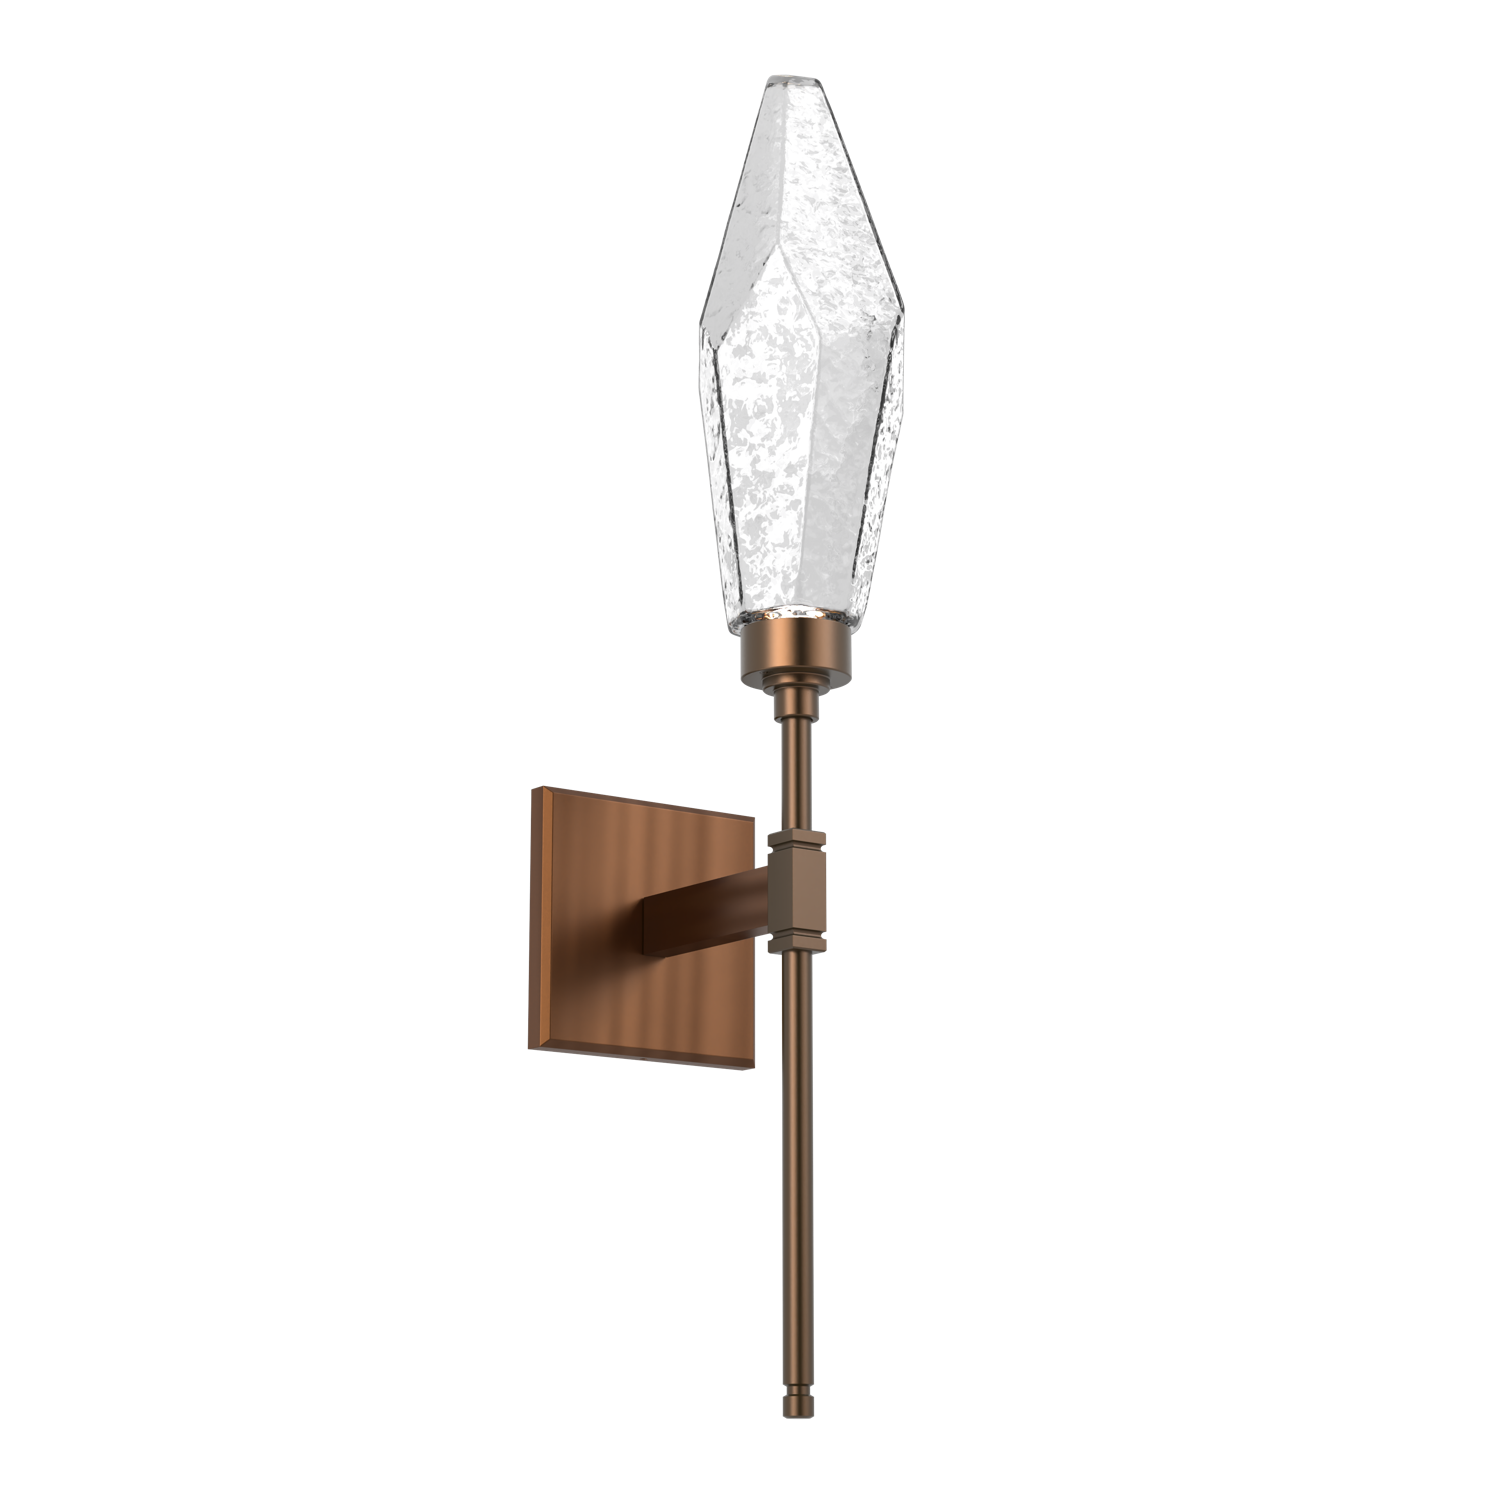 IDB0050-07-RB-CC-Hammerton-Studio-Rock-Crystal-belvedere-wall-sconce-with-oil-rubbed-bronze-finish-and-clear-glass-shades-and-LED-lamping